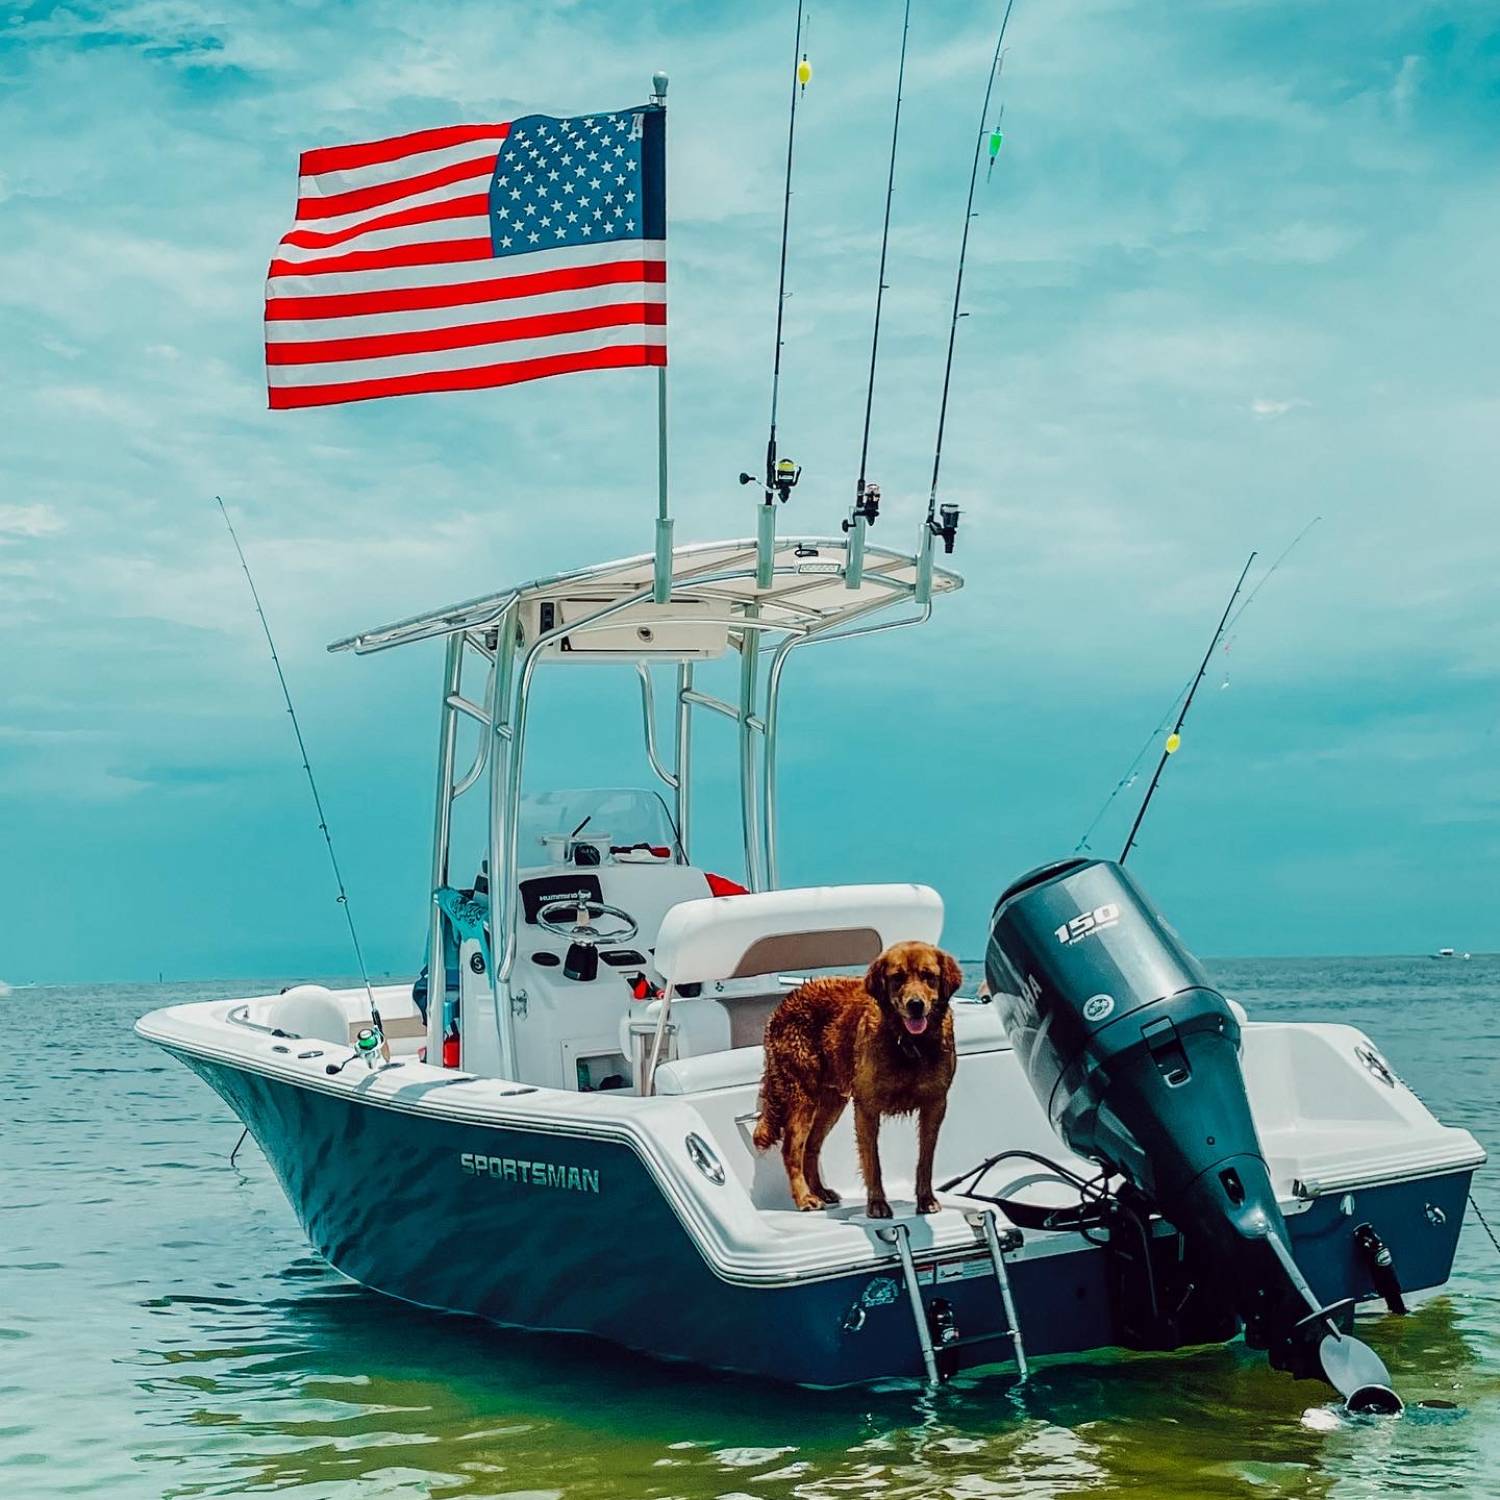 Title: Home of the Red White and Blue - On board their Sportsman Open 212 Center Console - Location: Dauphin Island, Al. Participating in the Photo Contest #SportsmanSeptember